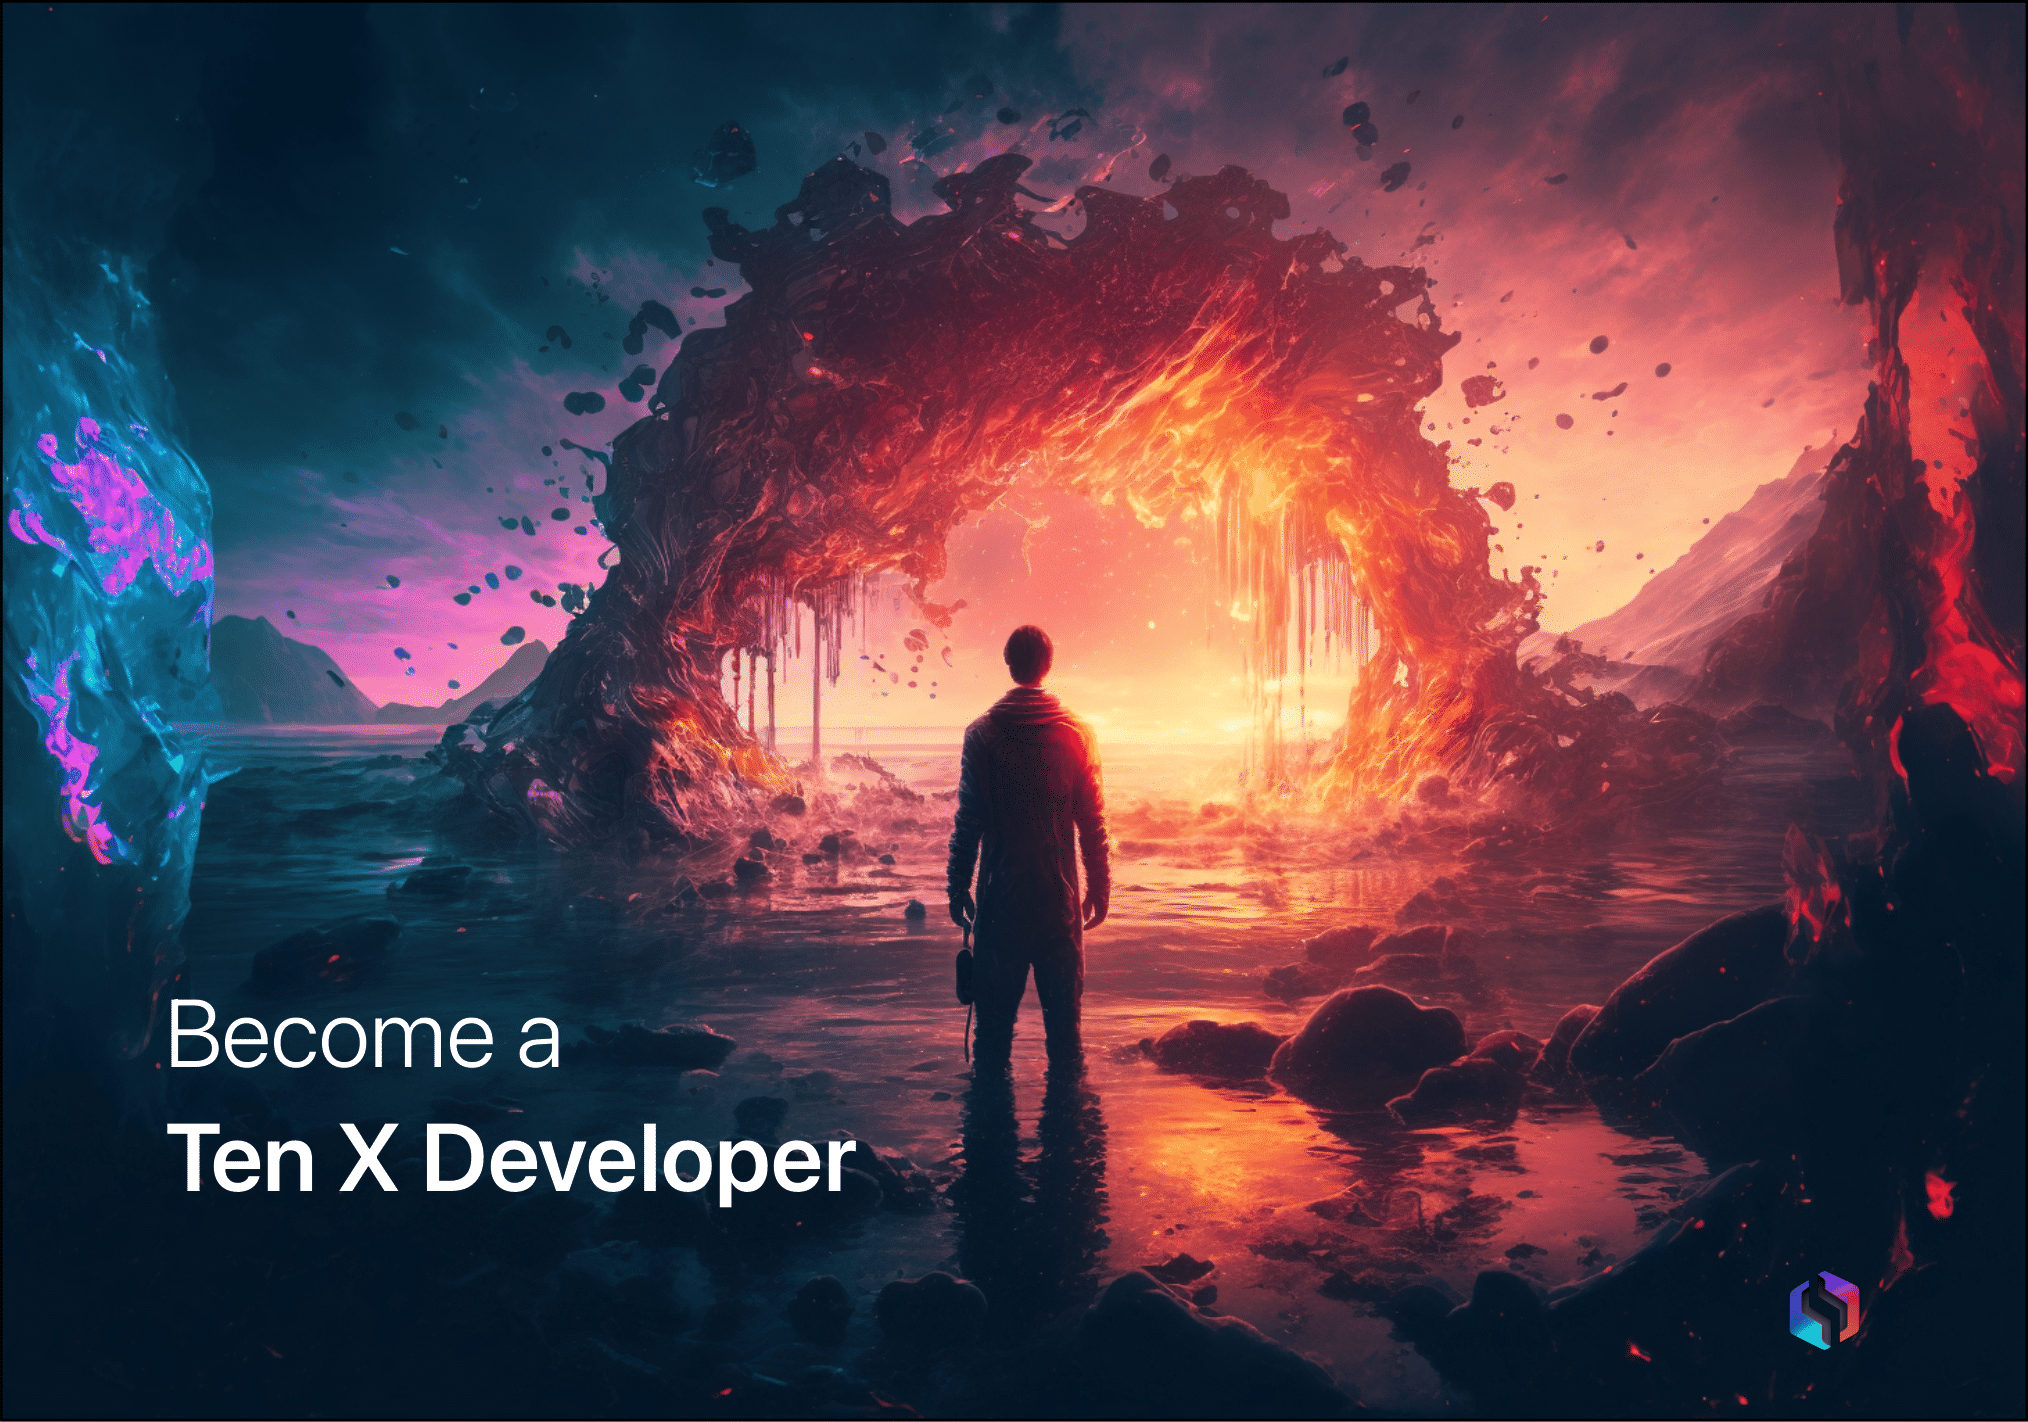 You can become a 10x developer.